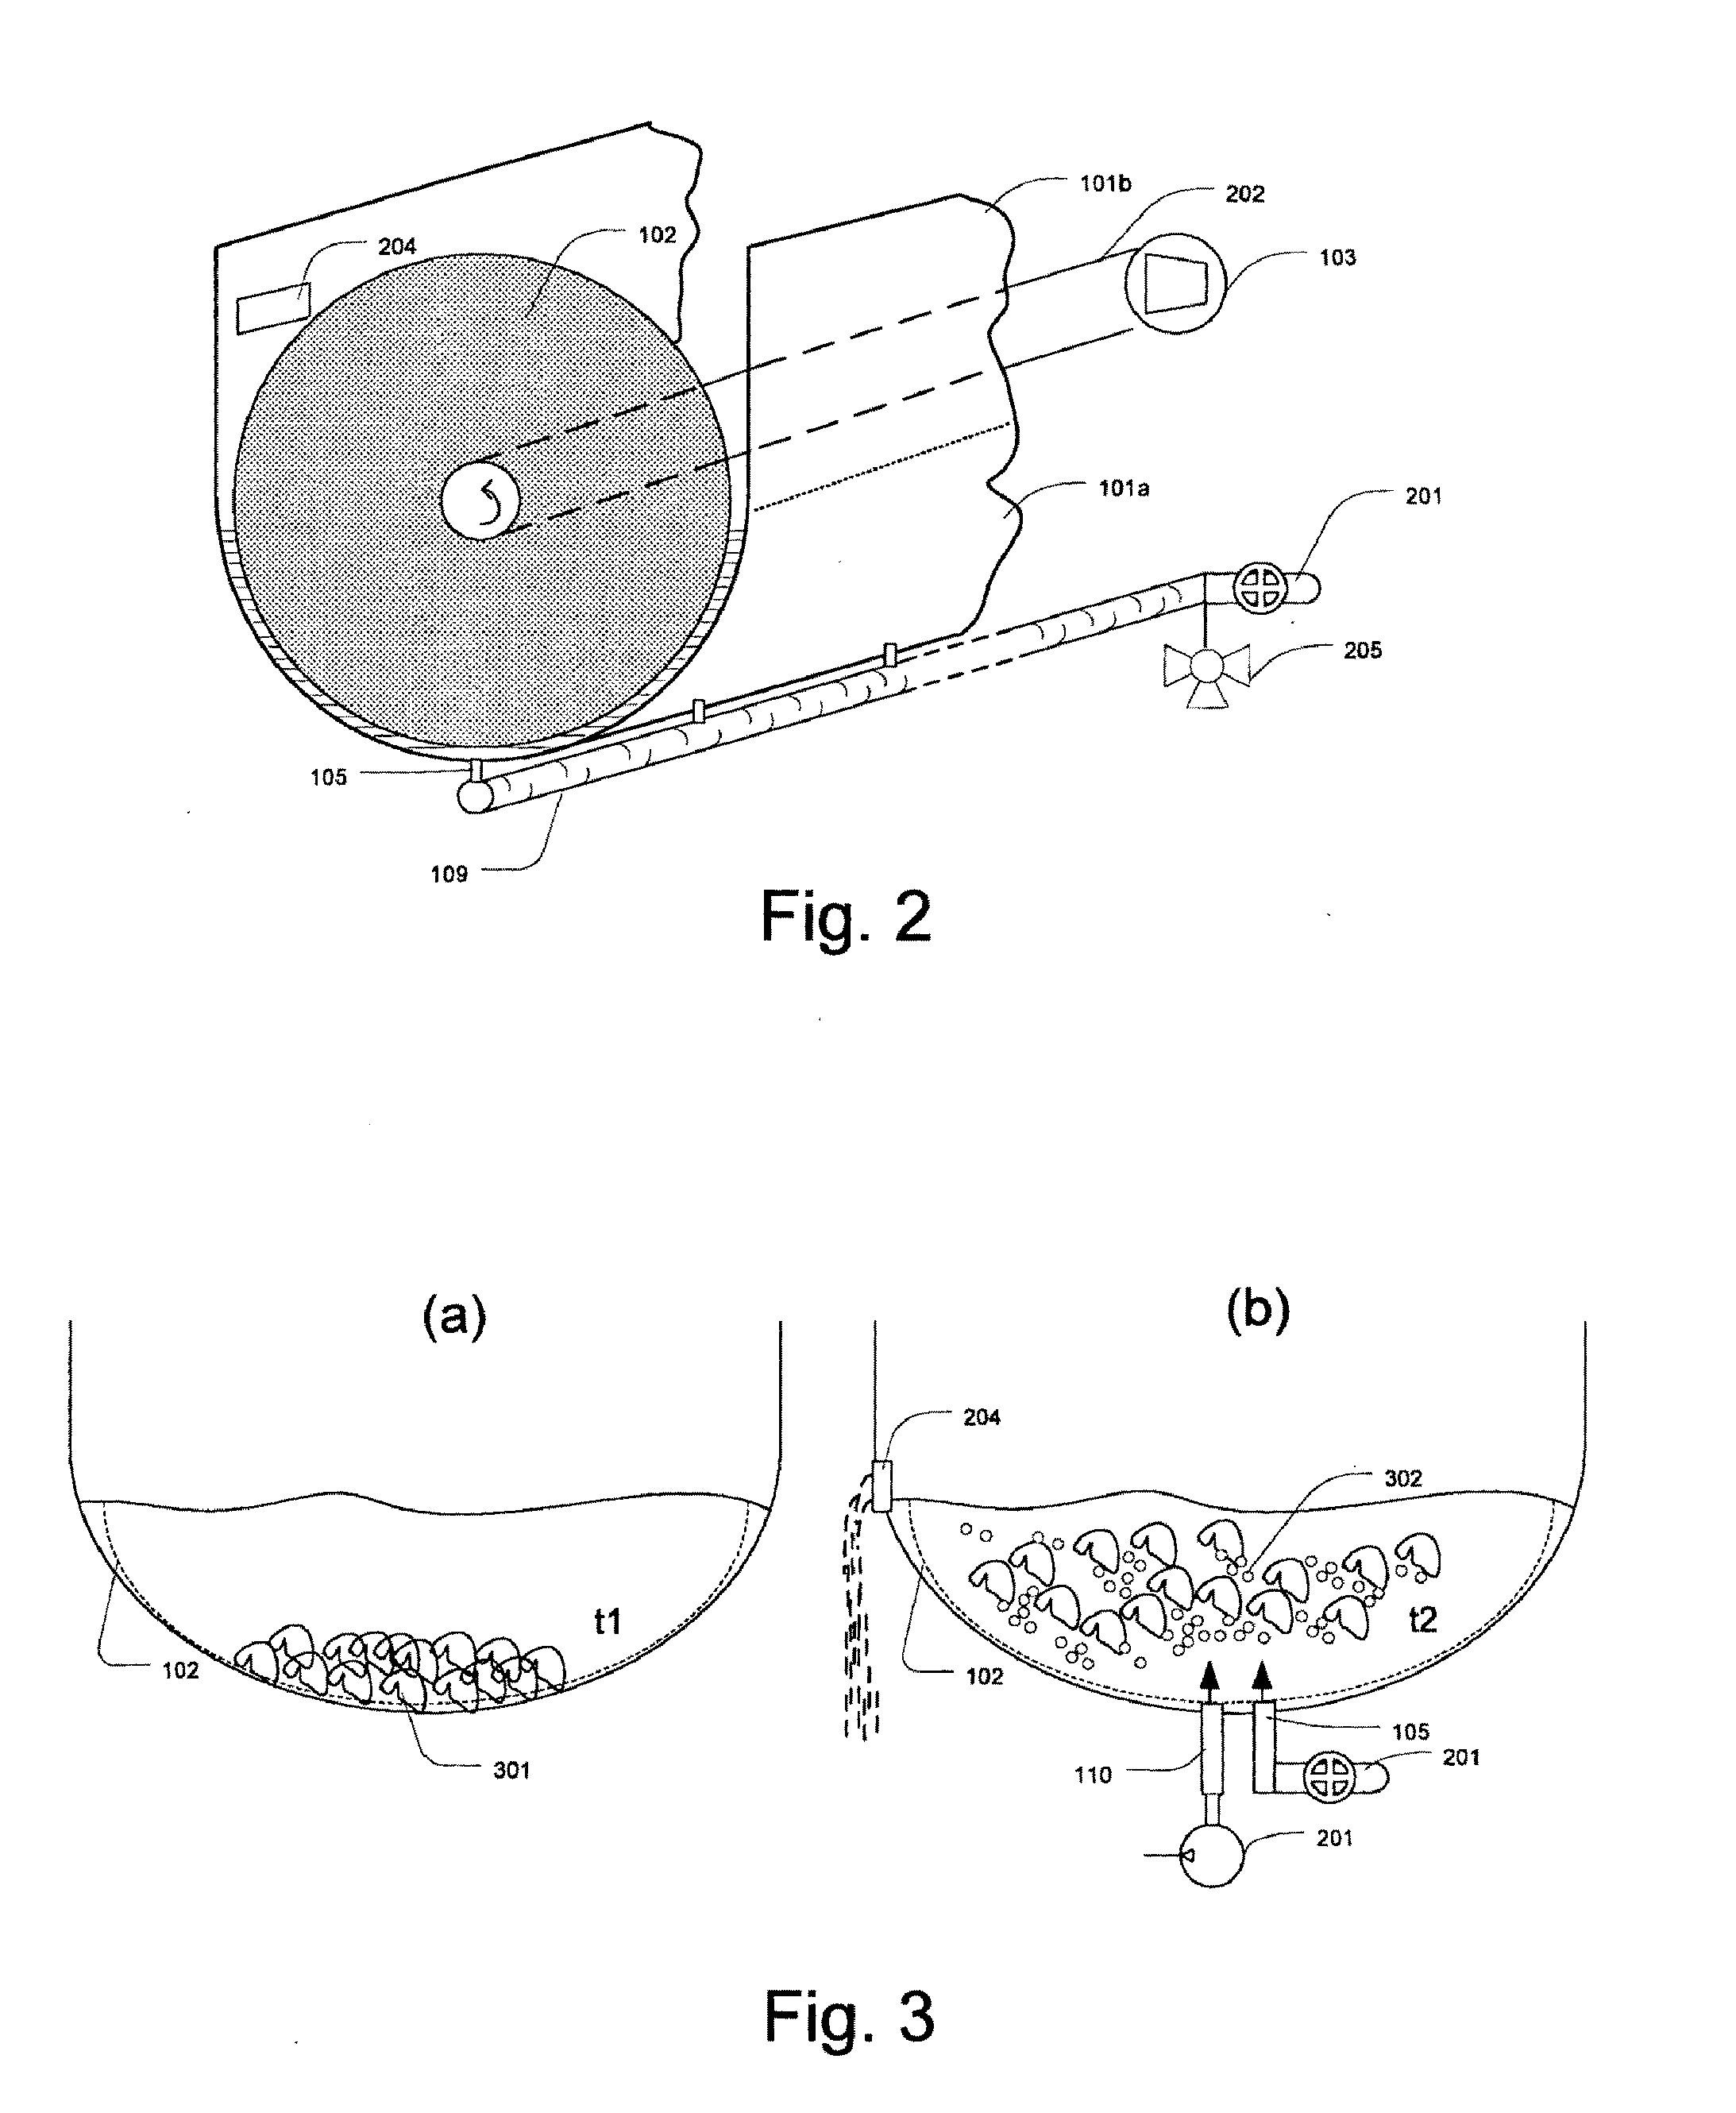 Apparatus for thawing or cooling food products